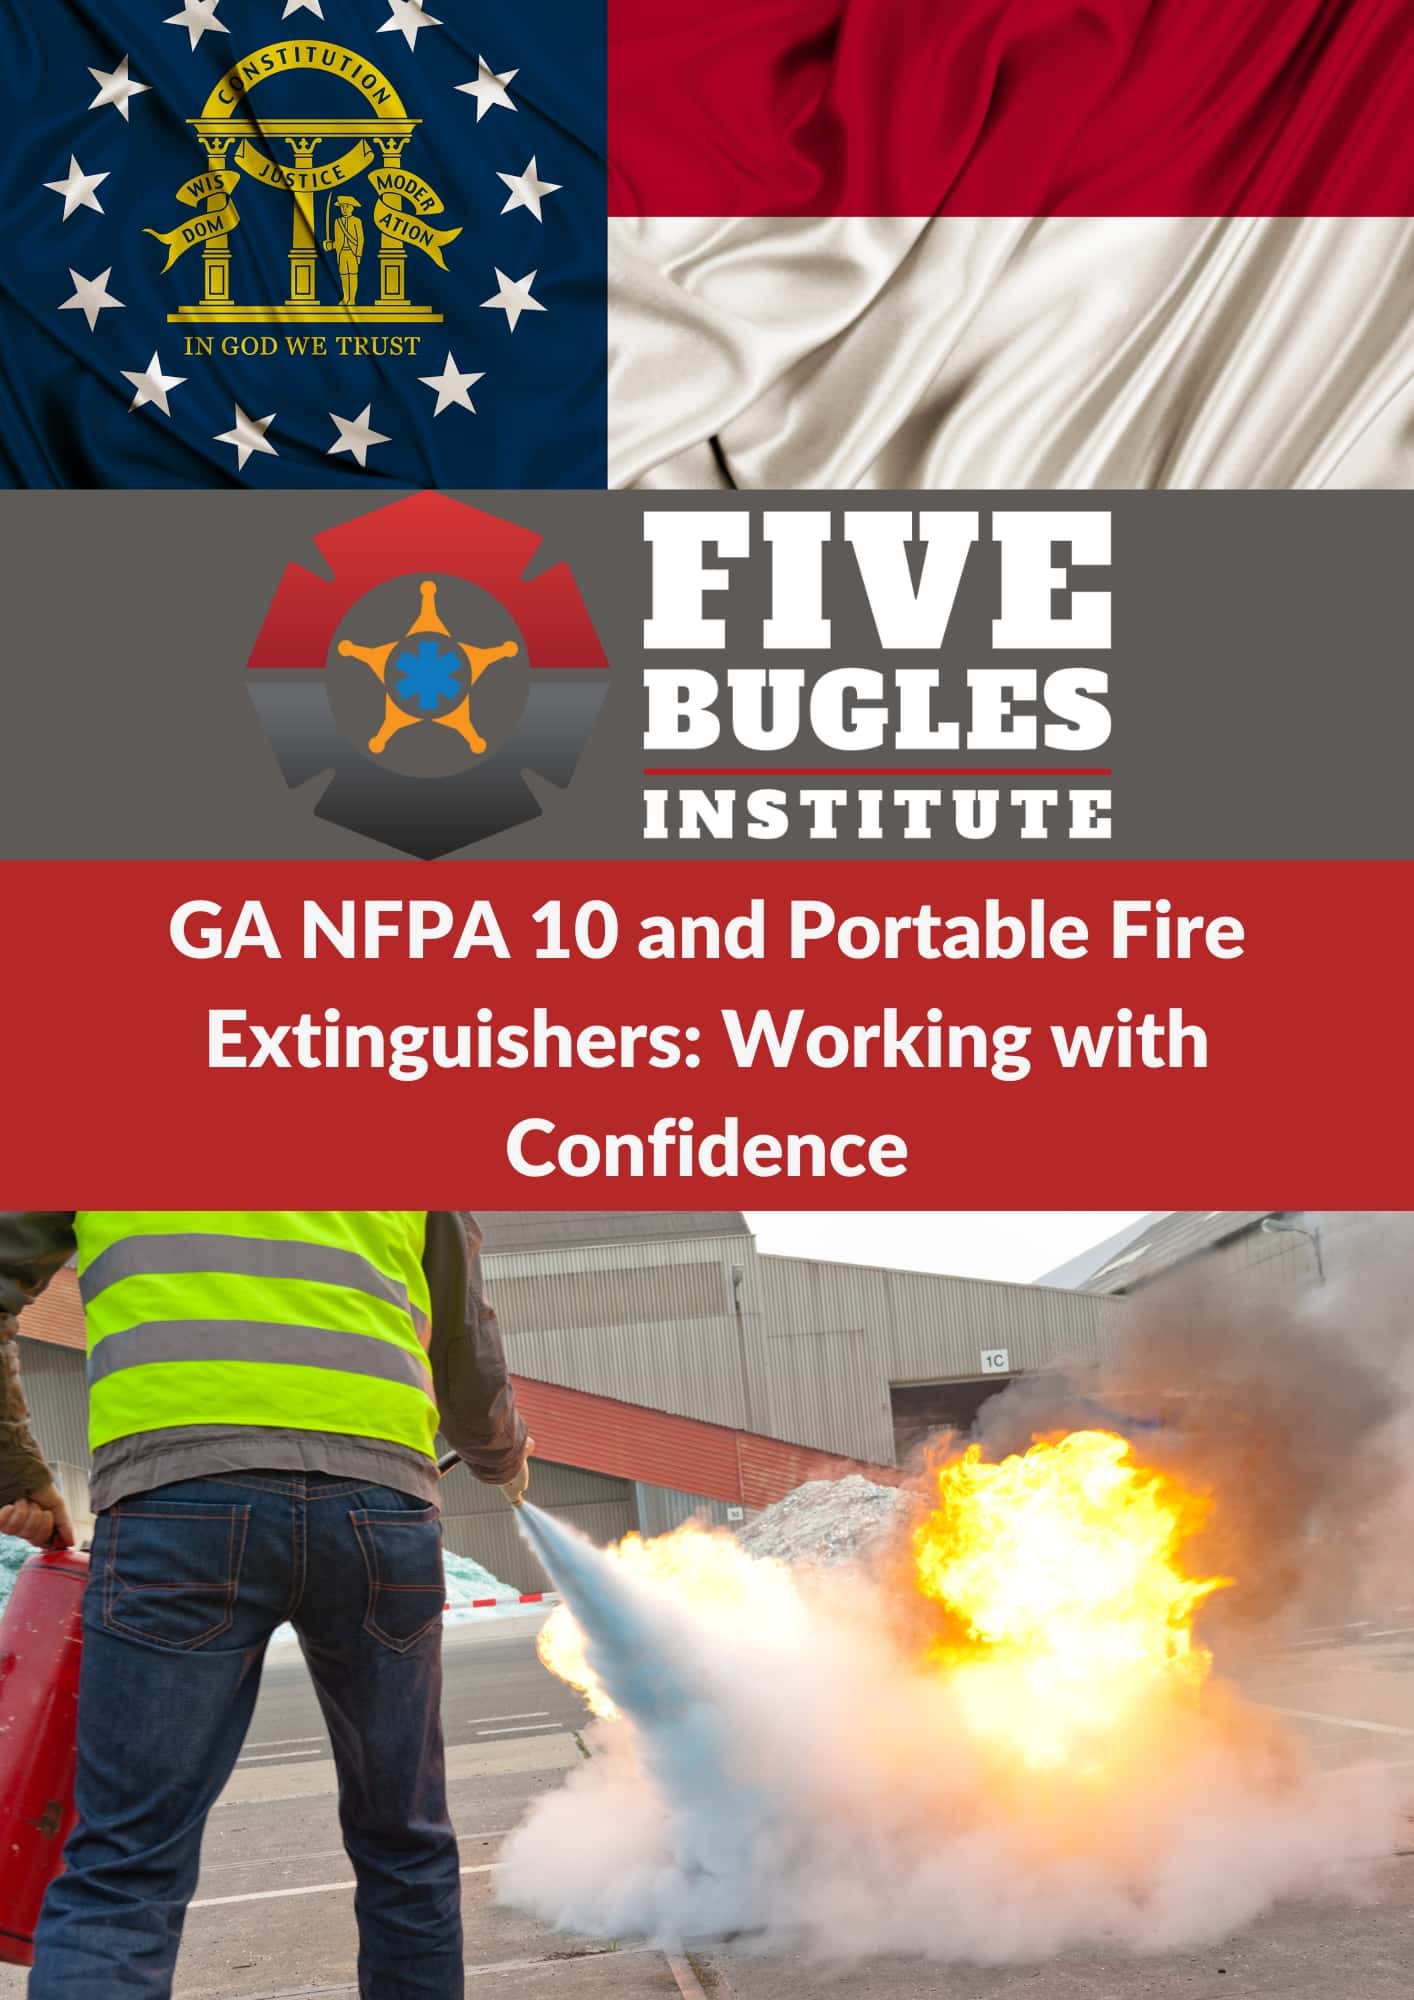 GA NFPA 10 and Portable Fire Extinguishers Working with Confident.